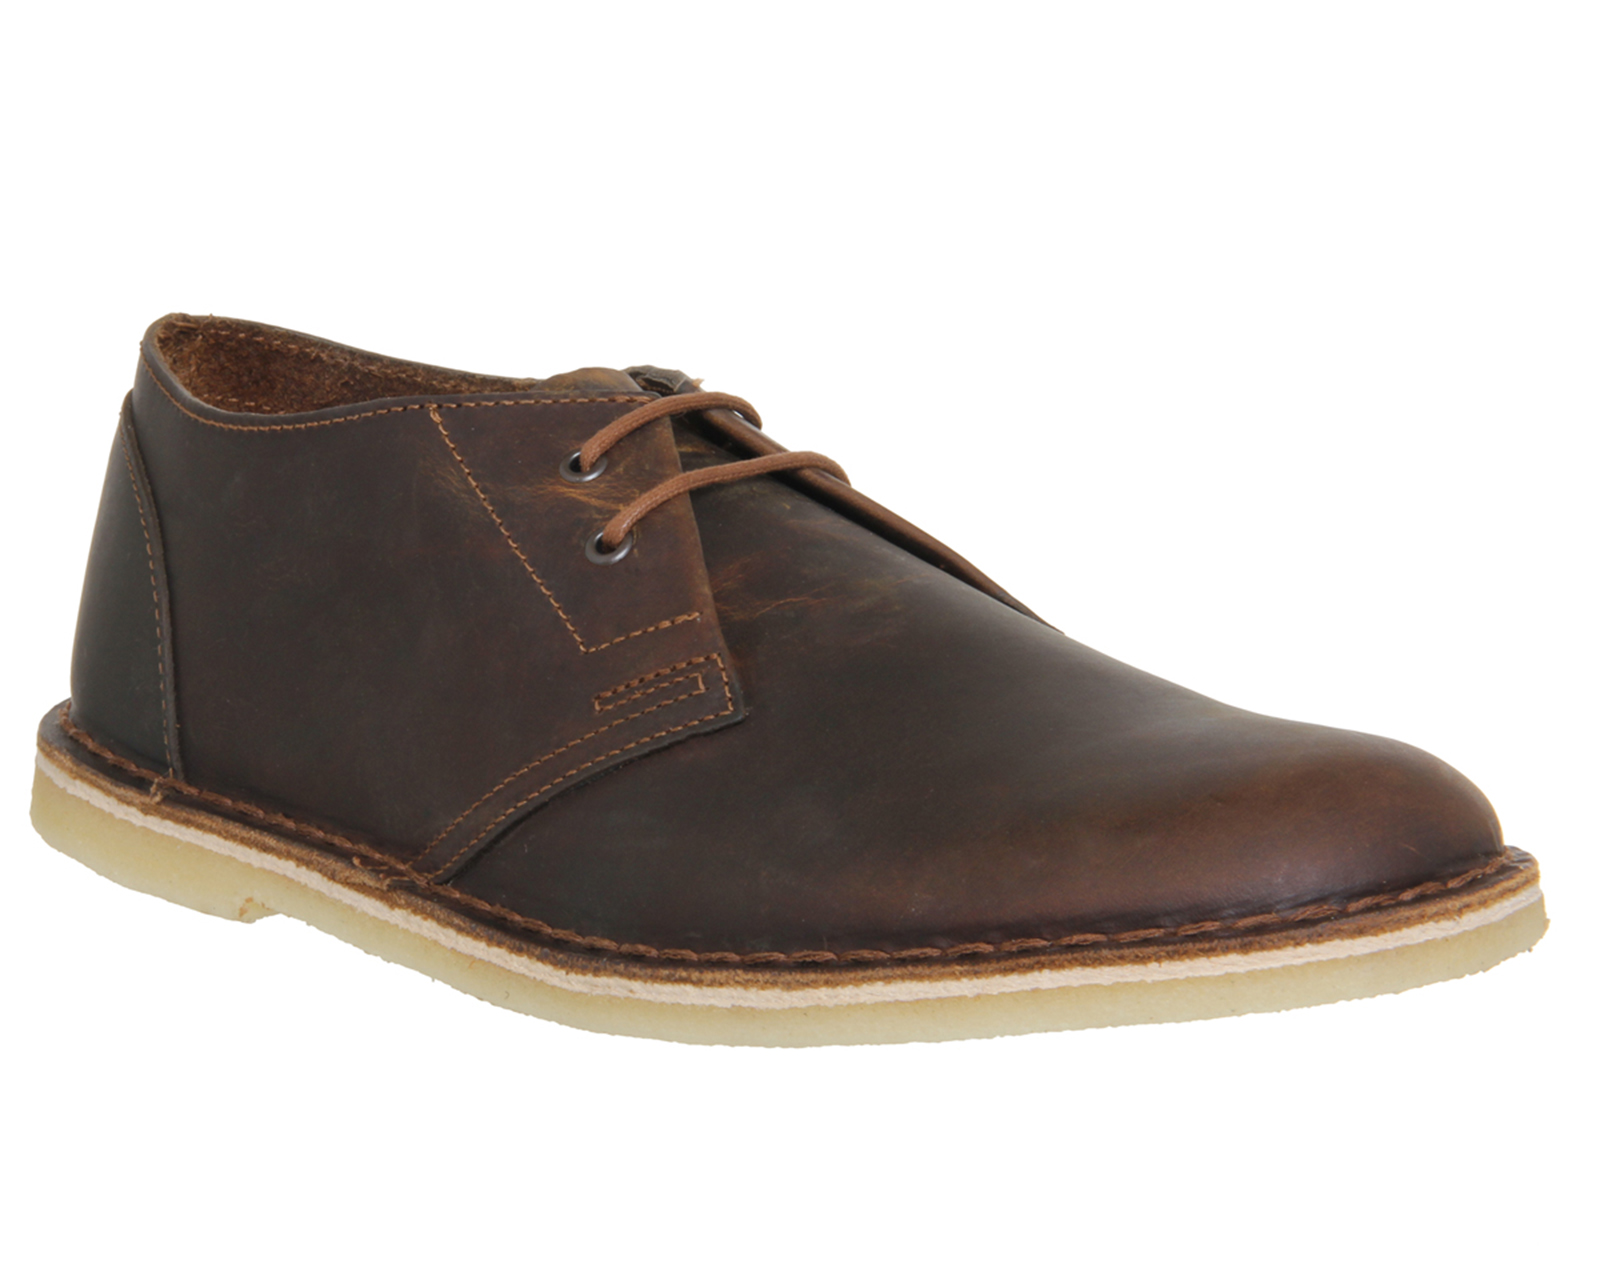 Puno etico Fare clarks jink beeswax 